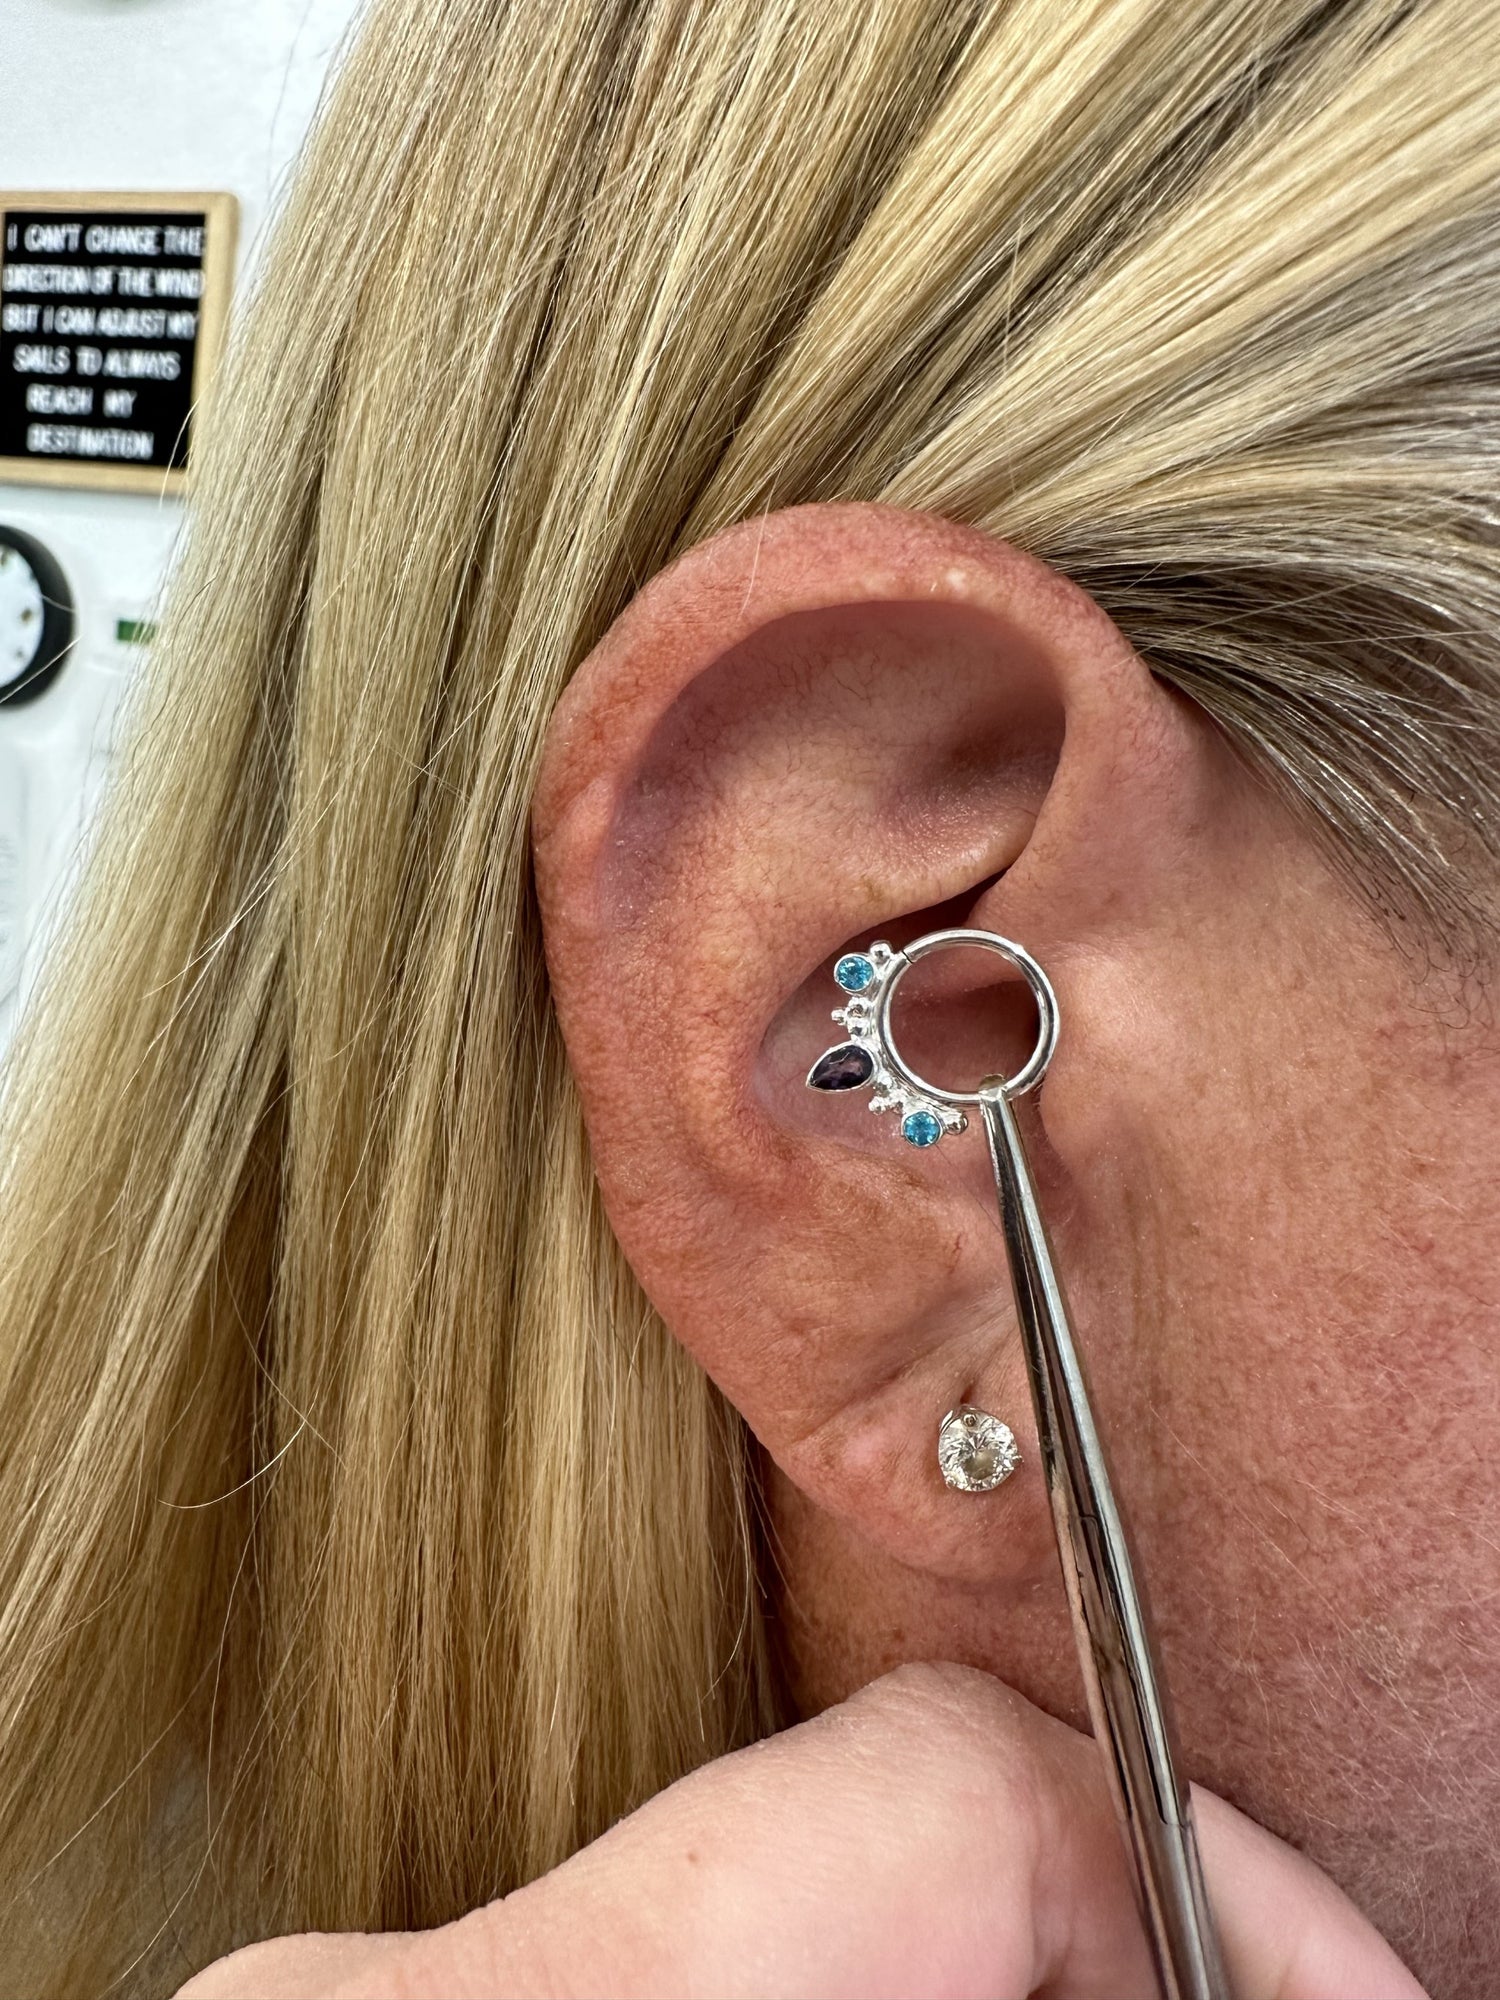 Daith & Septums For All!